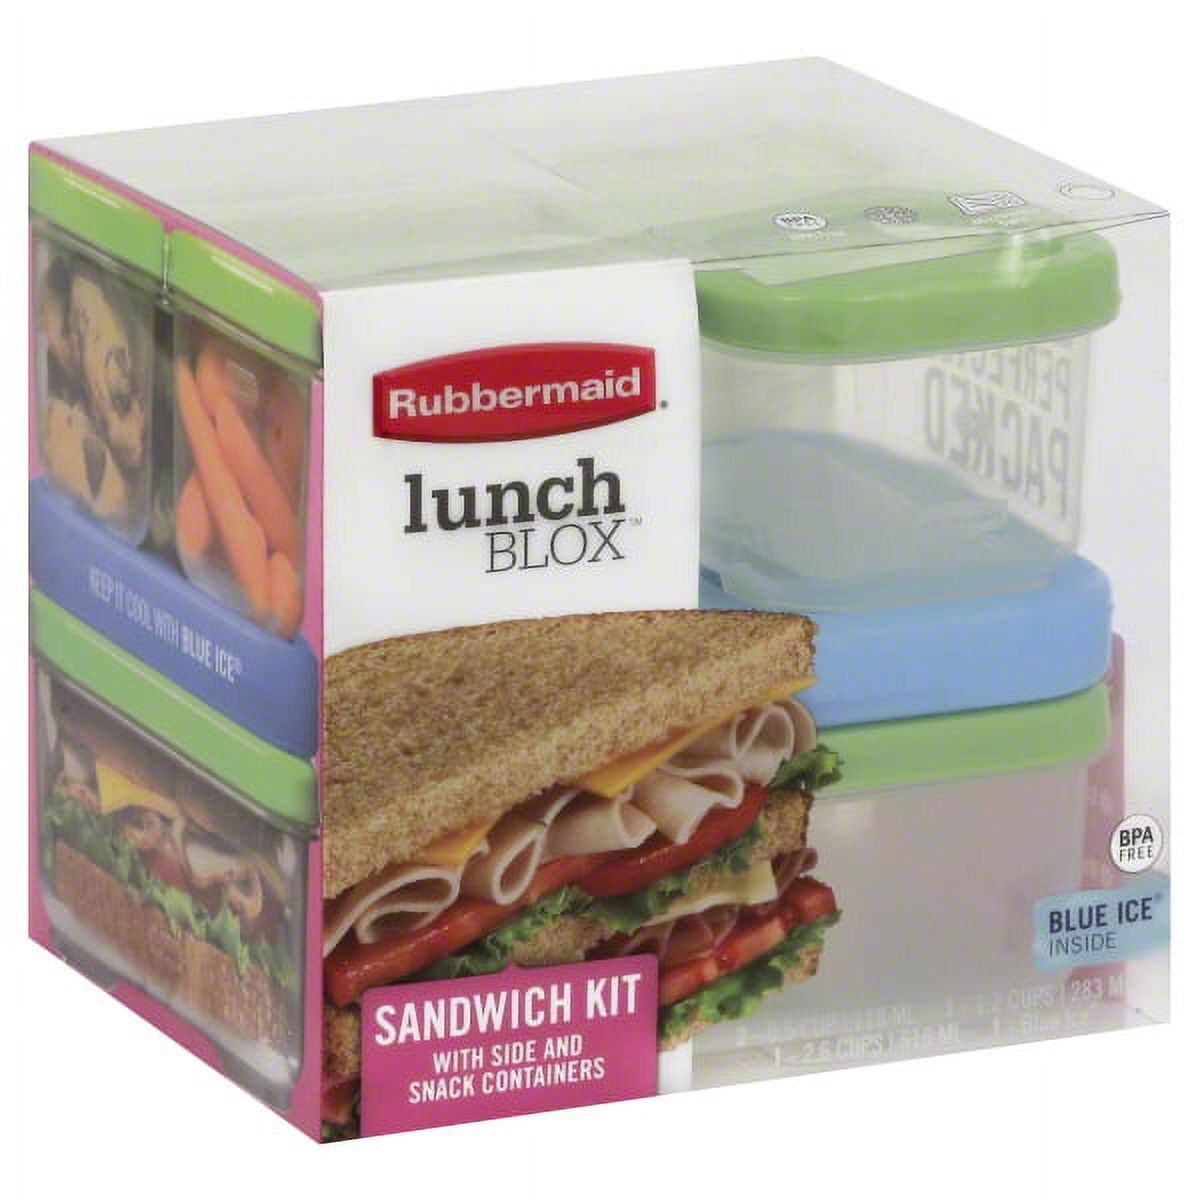 Rubbermaid, Lunchbox, Sandwich Kit, Green 5 Count - image 3 of 6